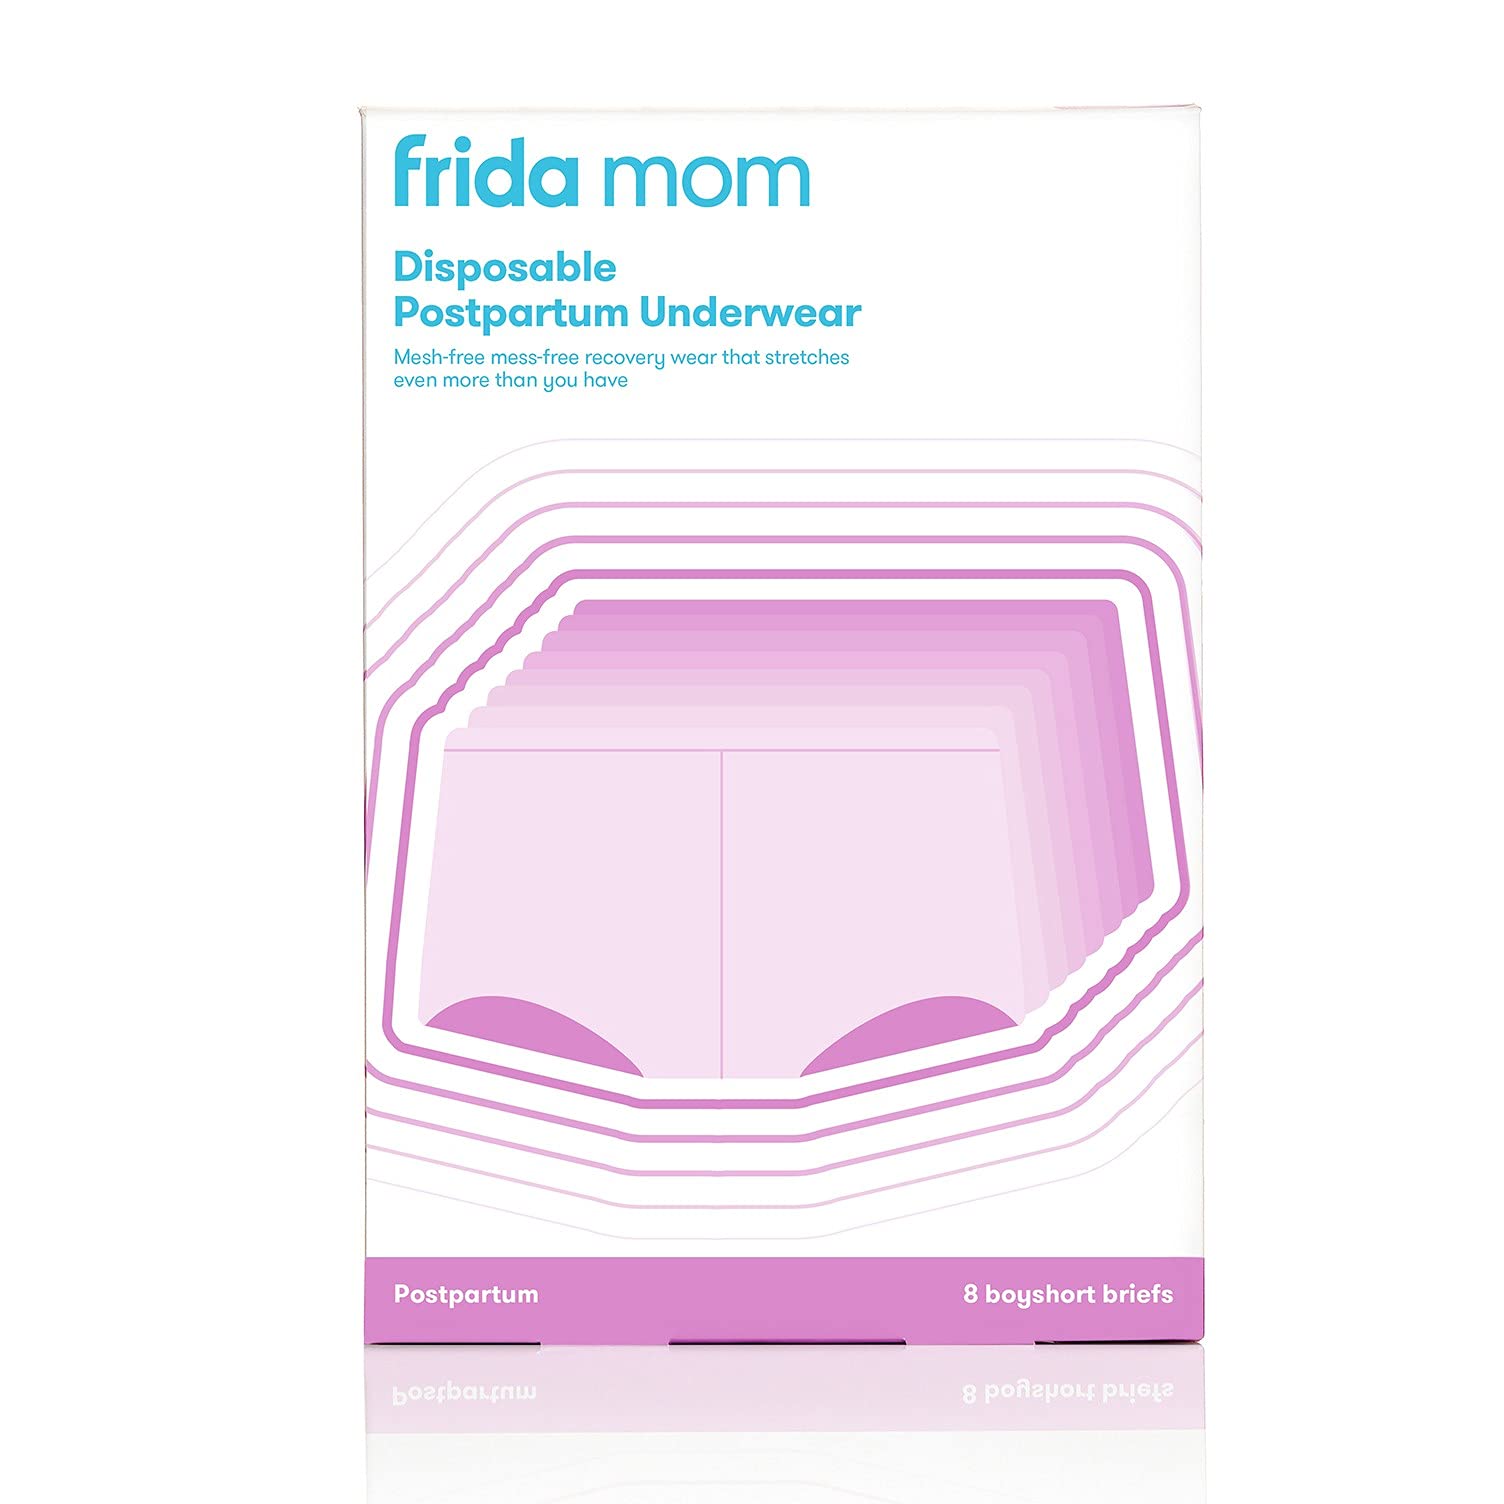 FridaBaby Frida Mom Disposable Postpartum Underwear (Without pad) | Super Soft, Stretchy, Breathable, Wicking, Latex-Free, Boyshort Cut | Regular (8 Count), 28 - 42 Inch